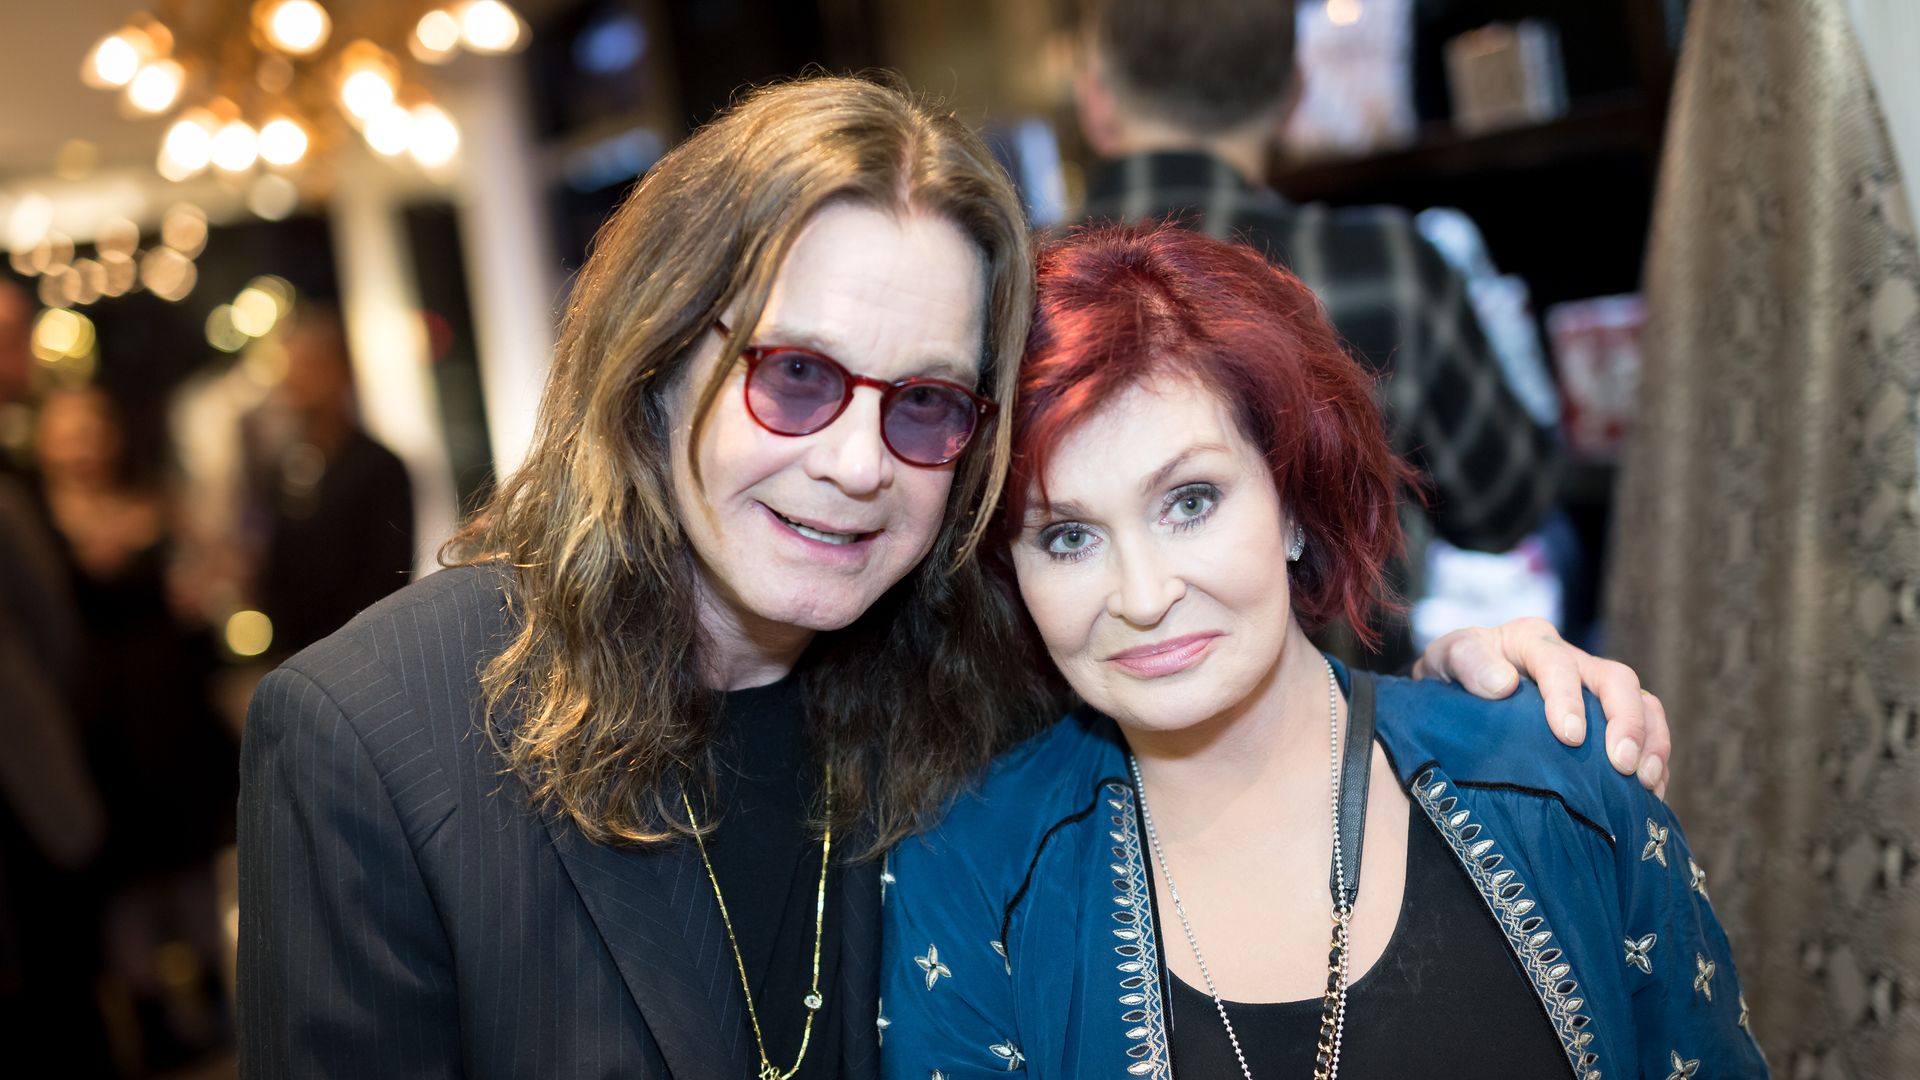 Ozzy Osbourne and Sharon Osbourne attend the Billy Morrison - Aude Somnia Solo Exhibition at Elisabeth Weinstock on September 28, 2017 in Los Angeles, California